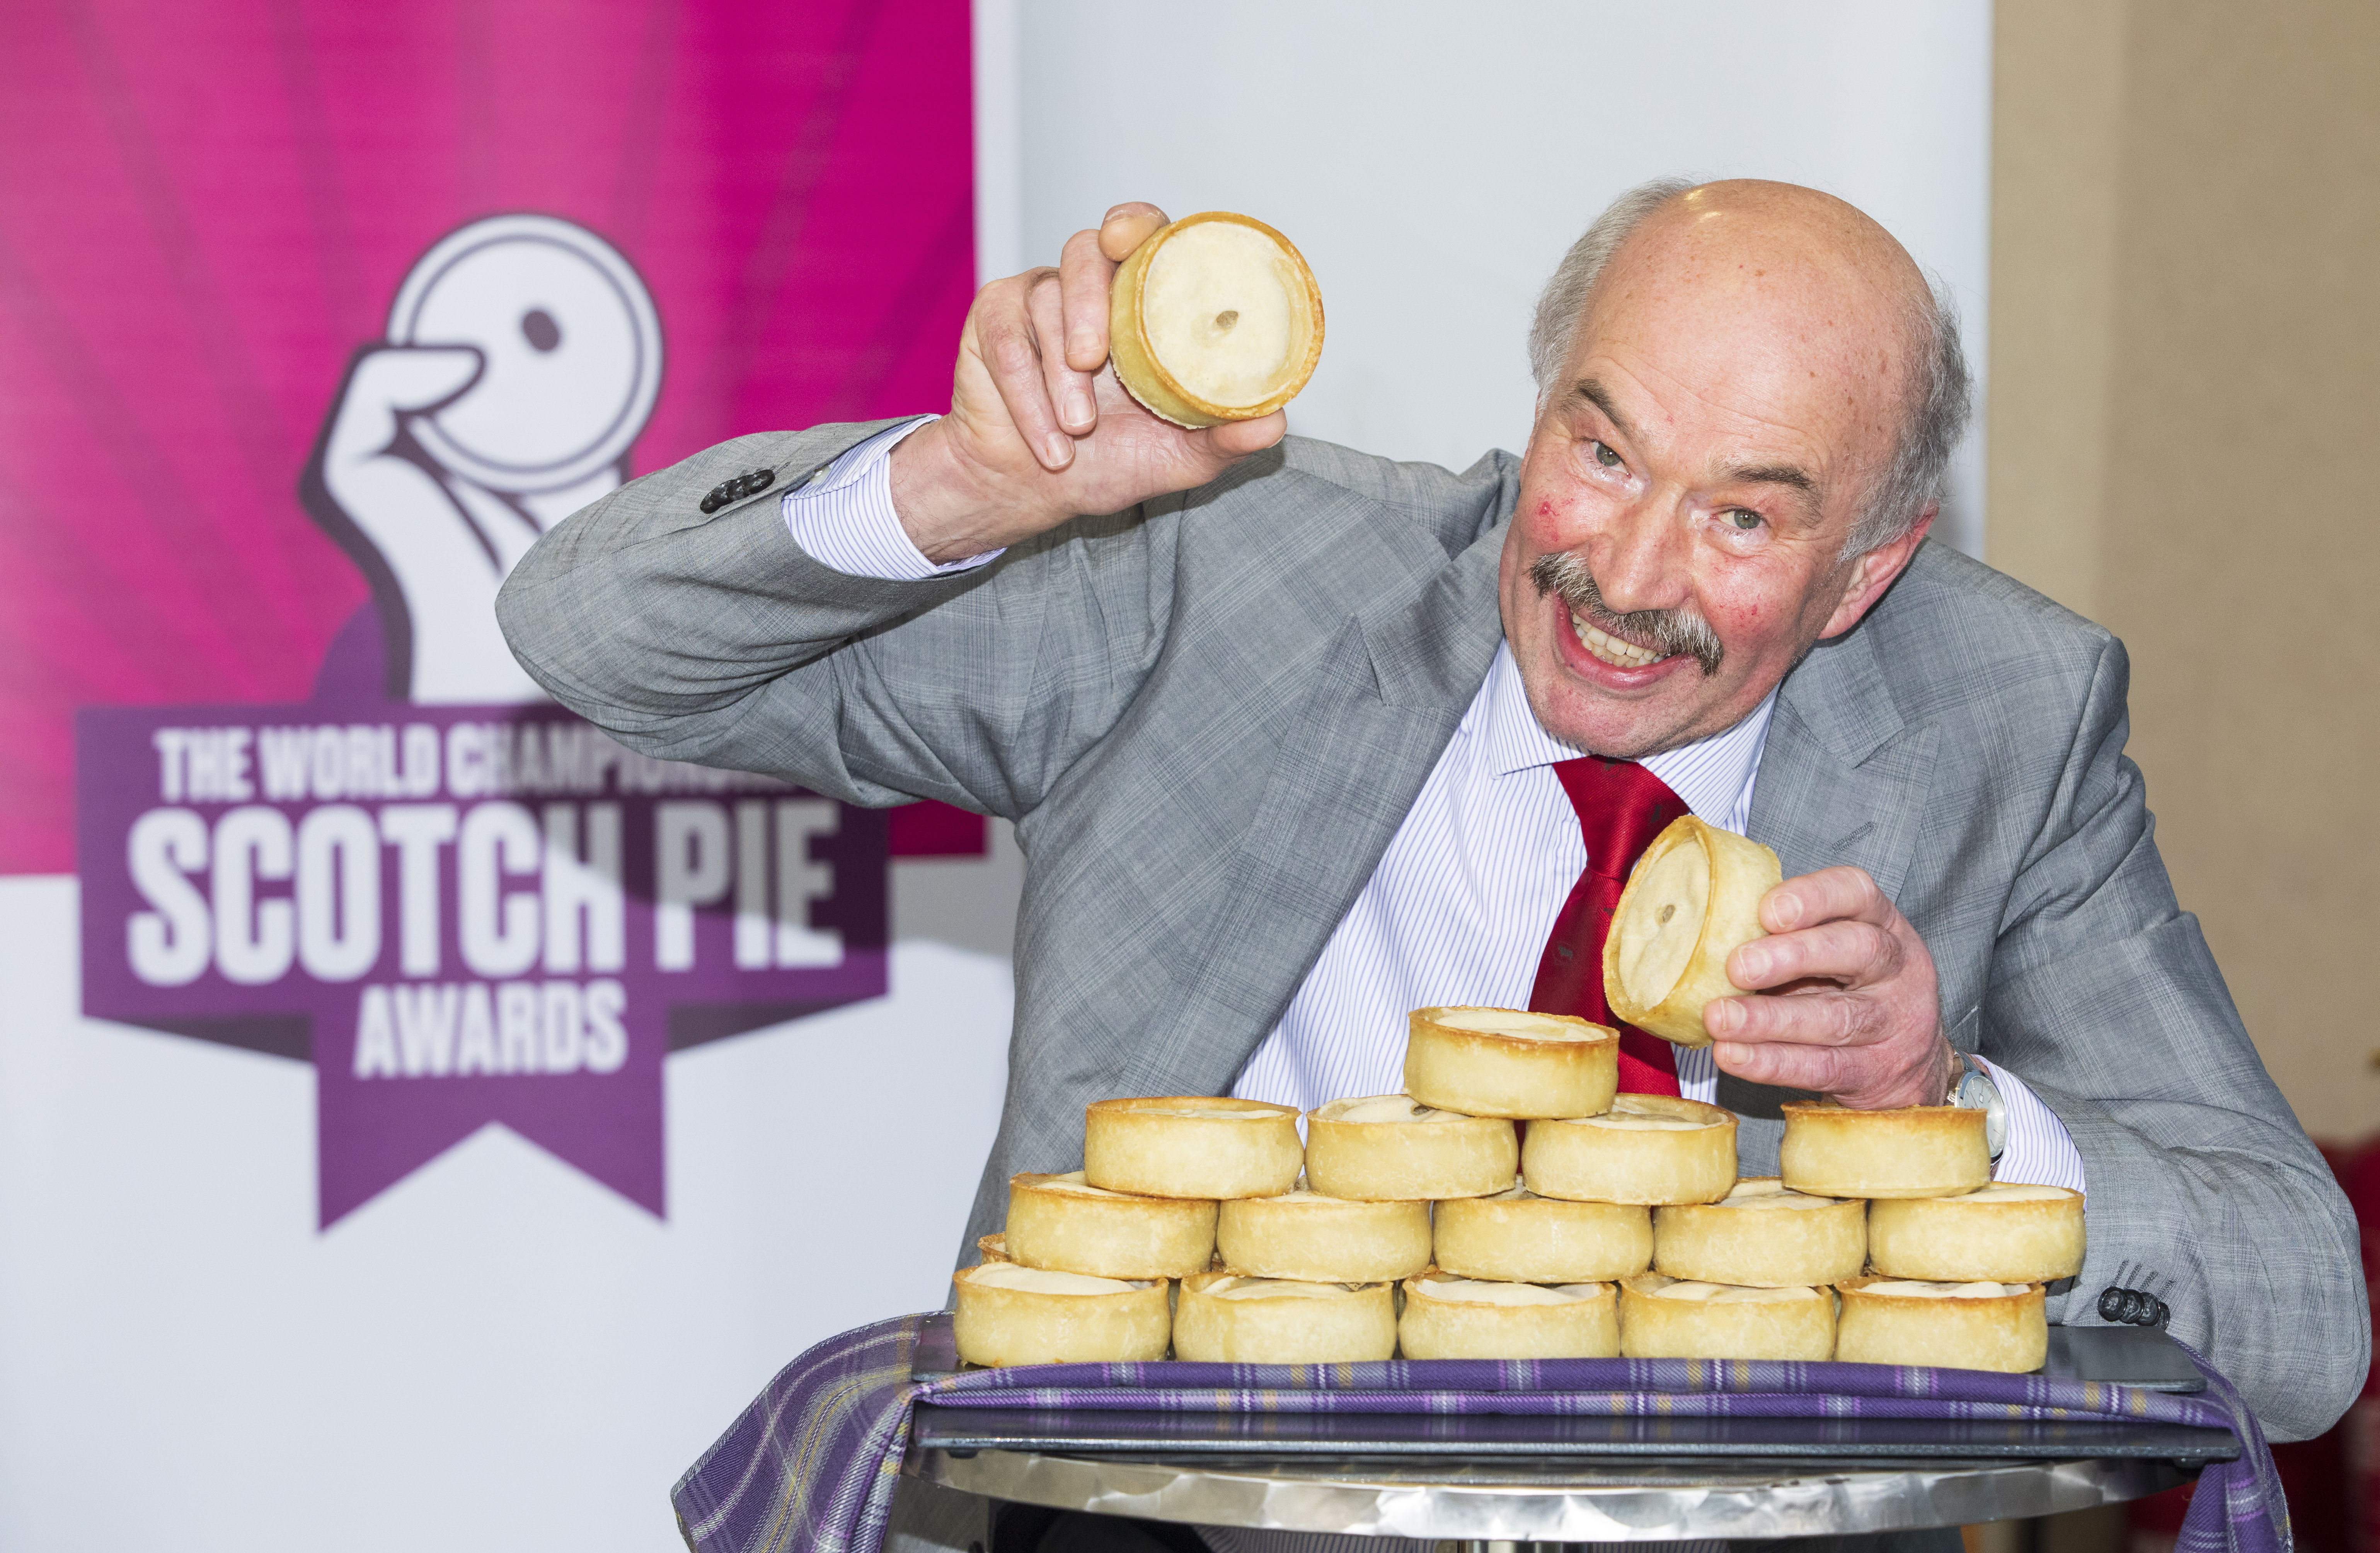 ***FREE TO USE***
Alan Pirie of James Pirie & Son, Blairgowrie Winner of the 21st World Championship Scotch Pie Awards 2020 hosted by Carol Smillie. Jan 14 2020